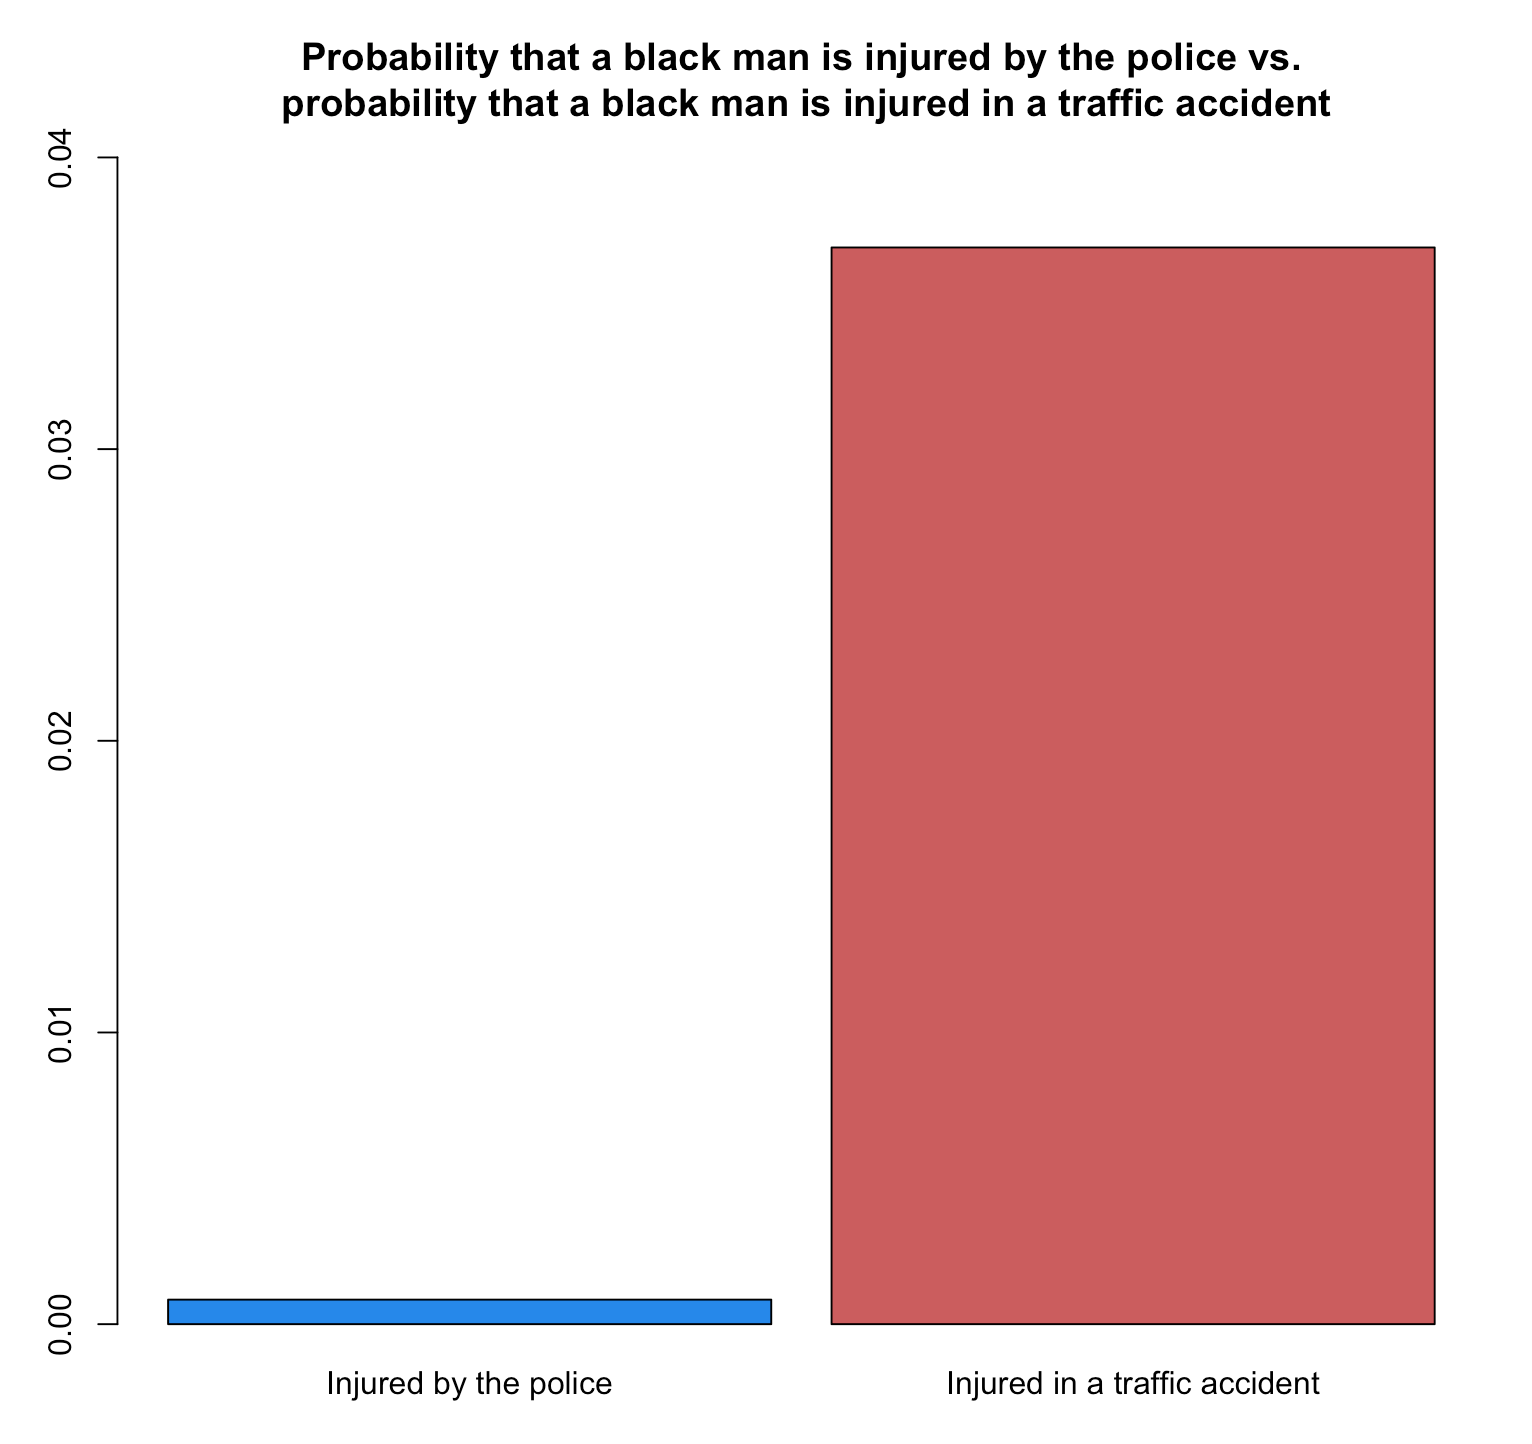 Probability-that-a-black-man-is-injured-by-the-police-vs.-probability-that-a-black-man-is-injured-in-a-traffic-accident.png